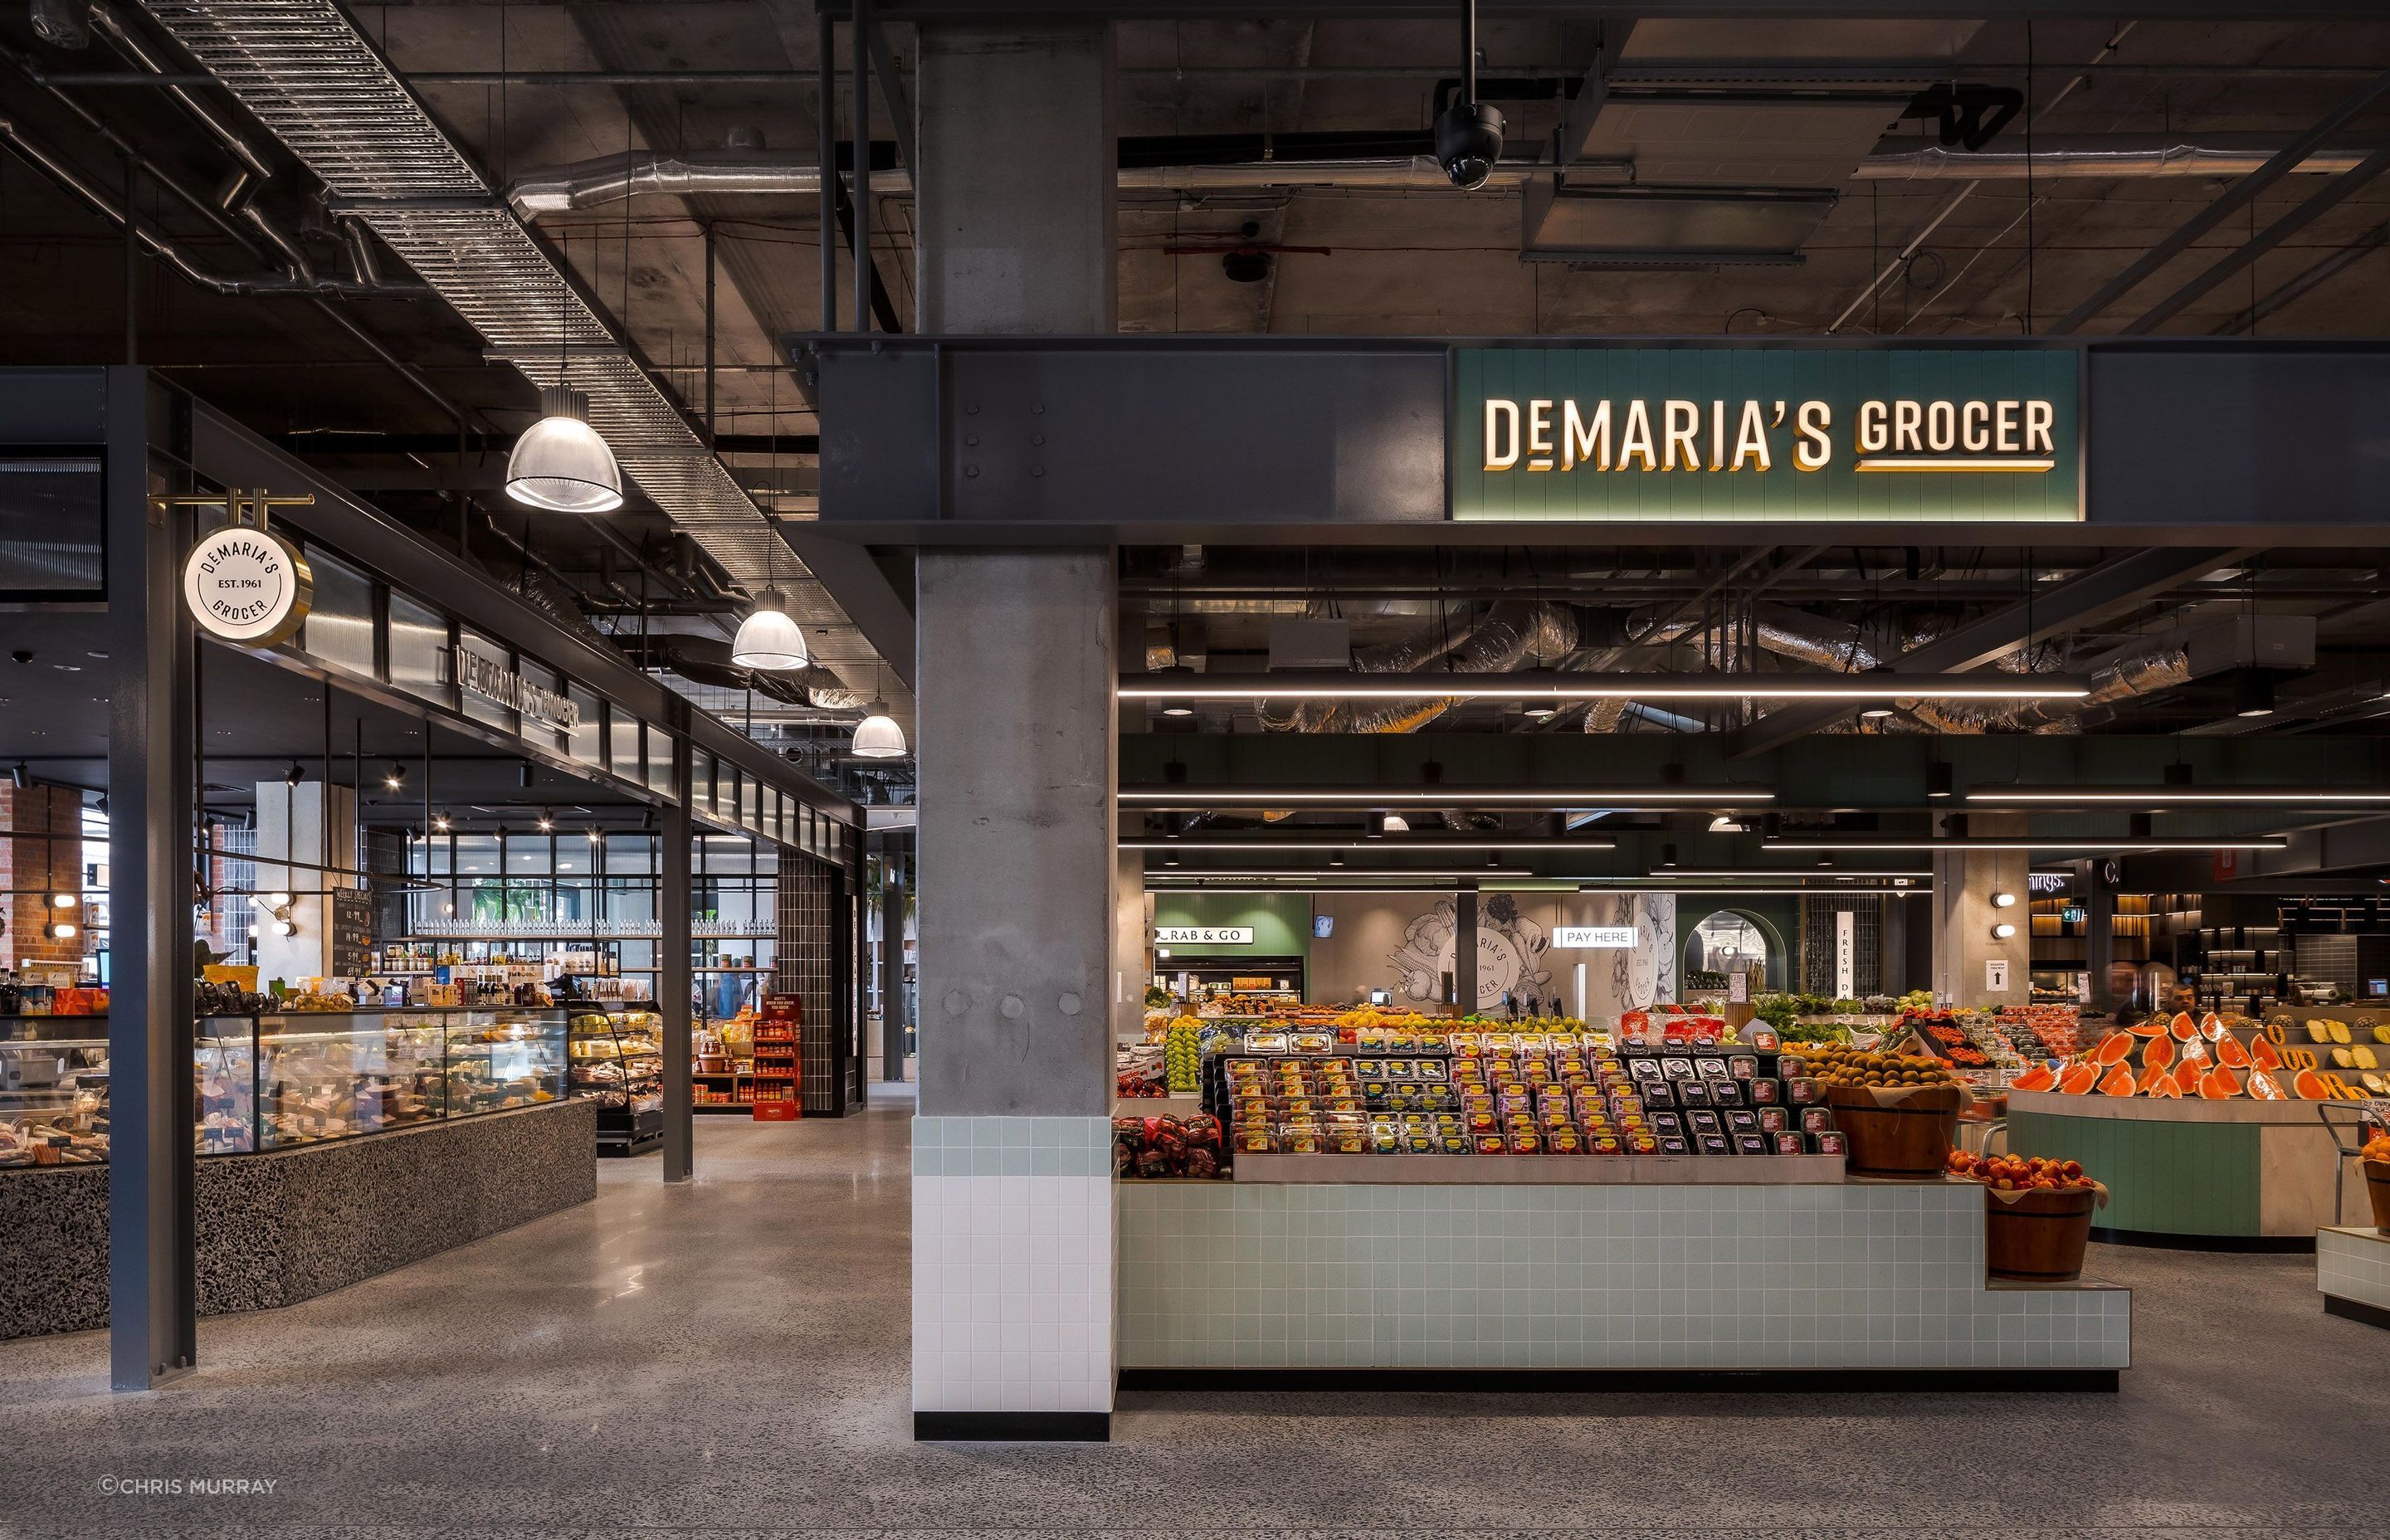 A welcoming space at DeMaria’s Grocer.